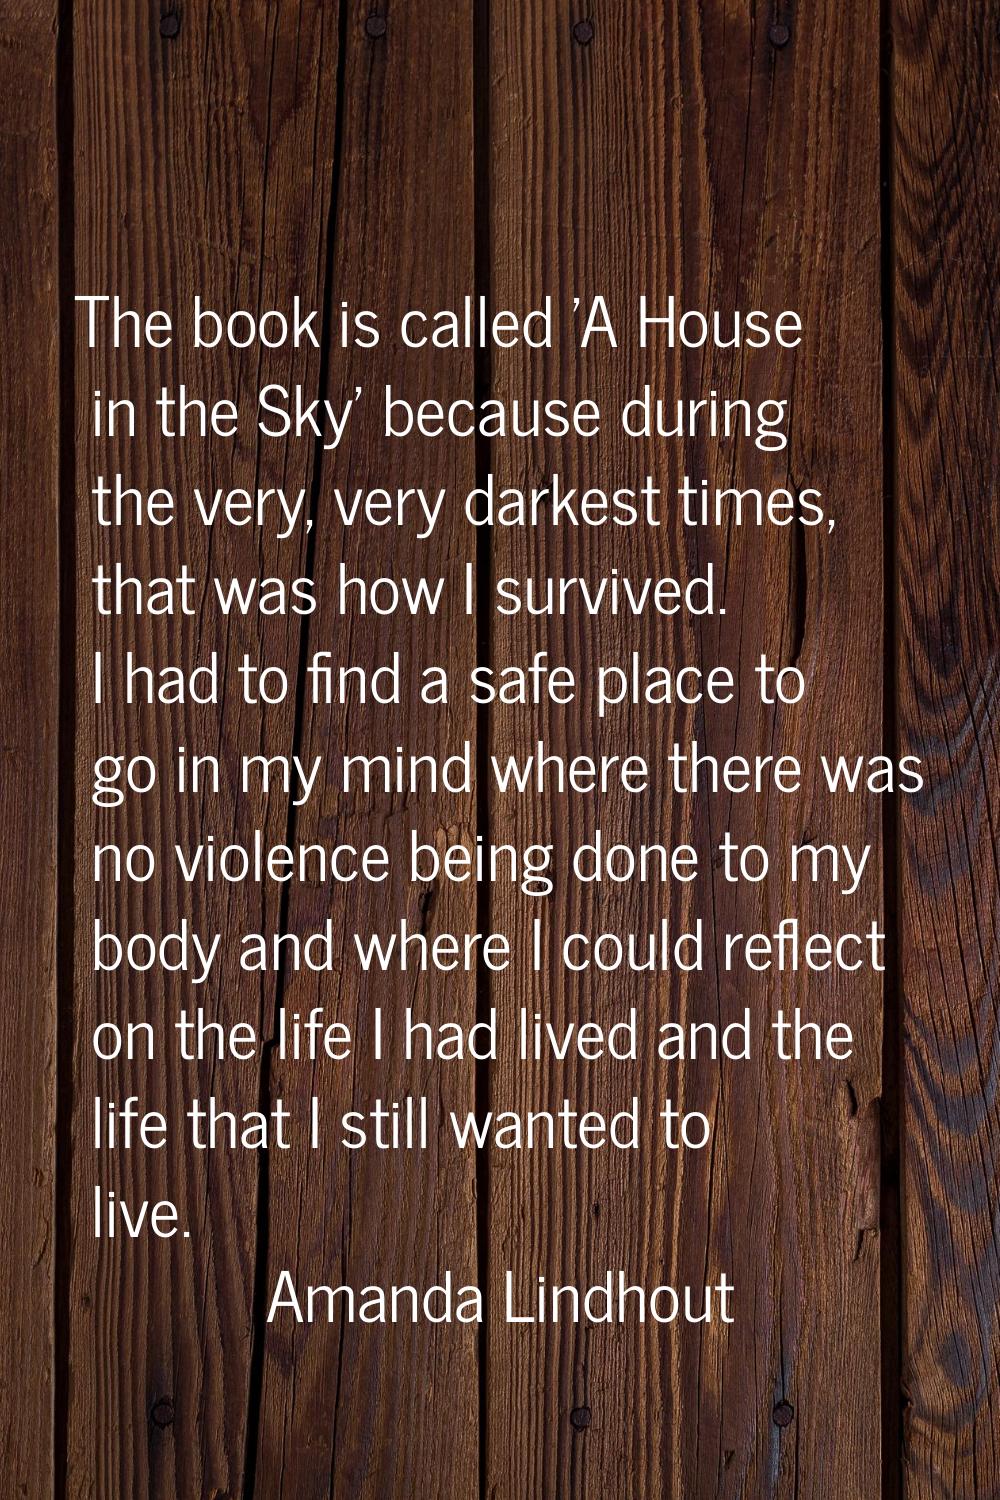 The book is called 'A House in the Sky' because during the very, very darkest times, that was how I